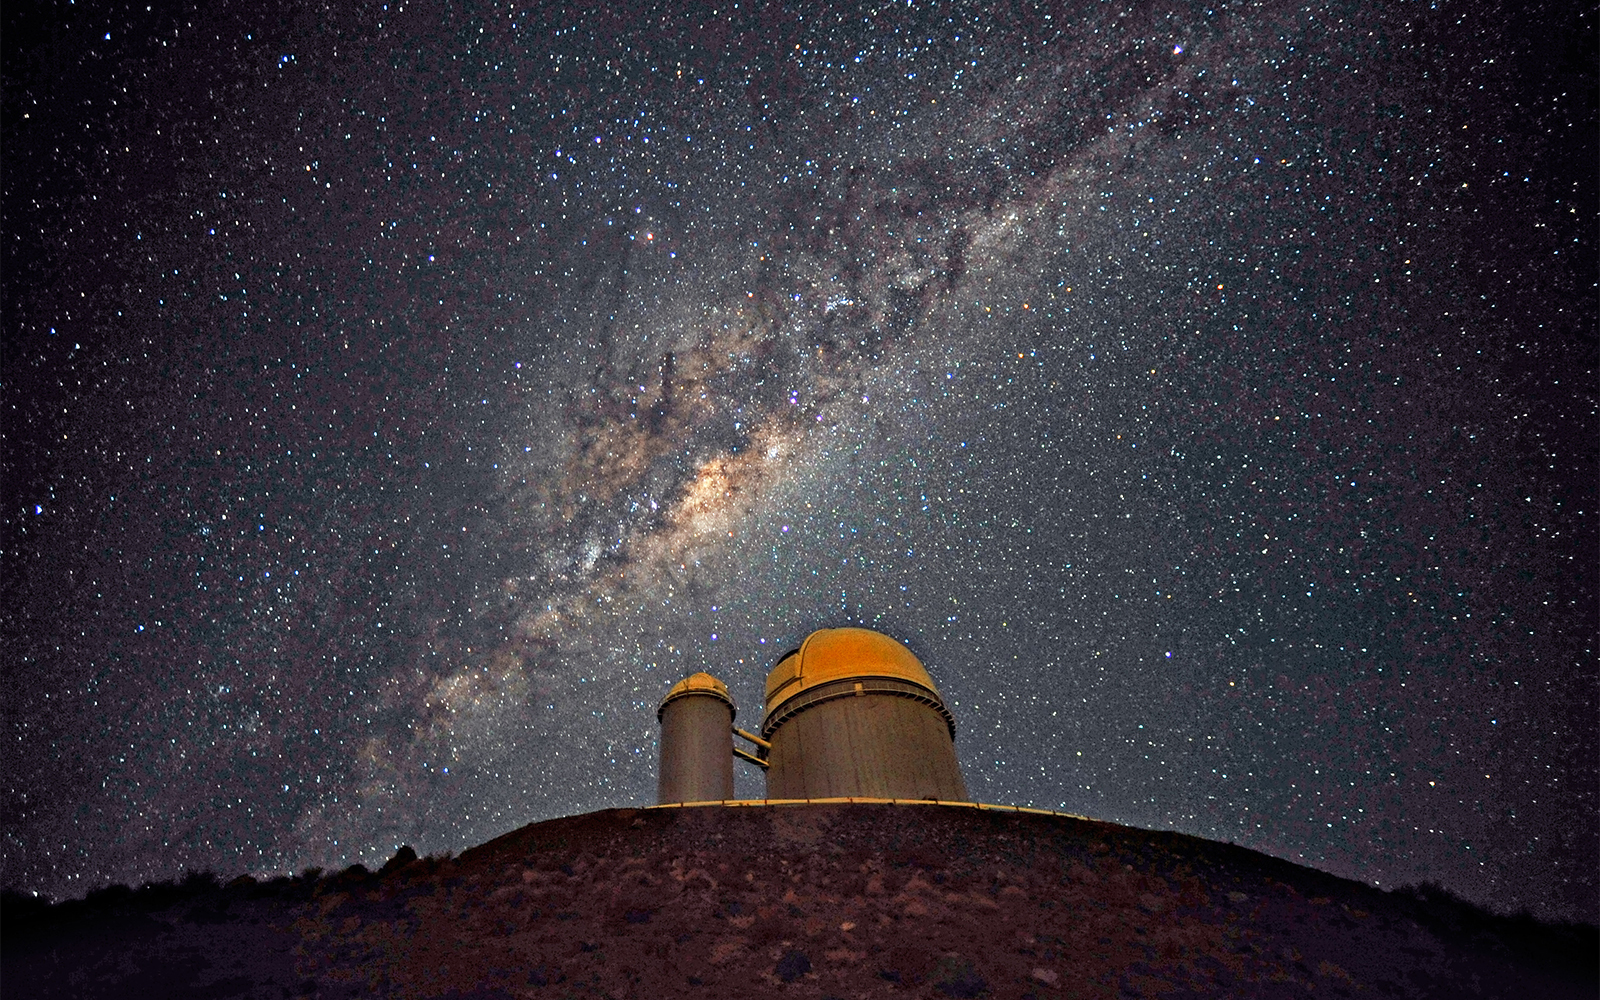 The Milky Way Galaxy is seen across the night skt over a domed telescope.